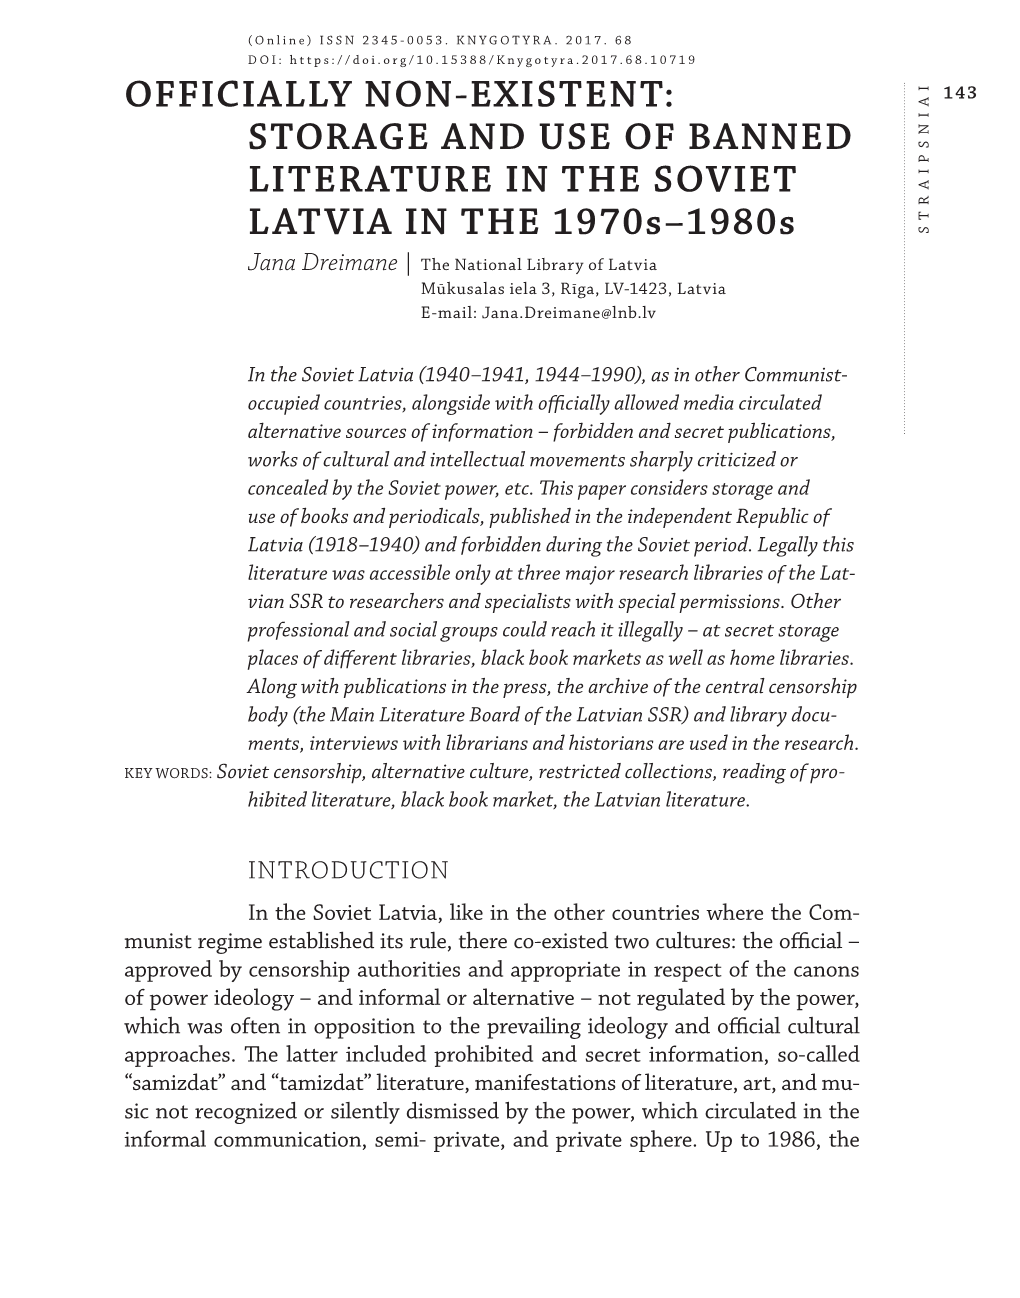 OFFICIALLY NON-EXISTENT: STORAGE and USE of BANNED LITERATURE in the SOVIET LATVIA in the 1970S–1980S